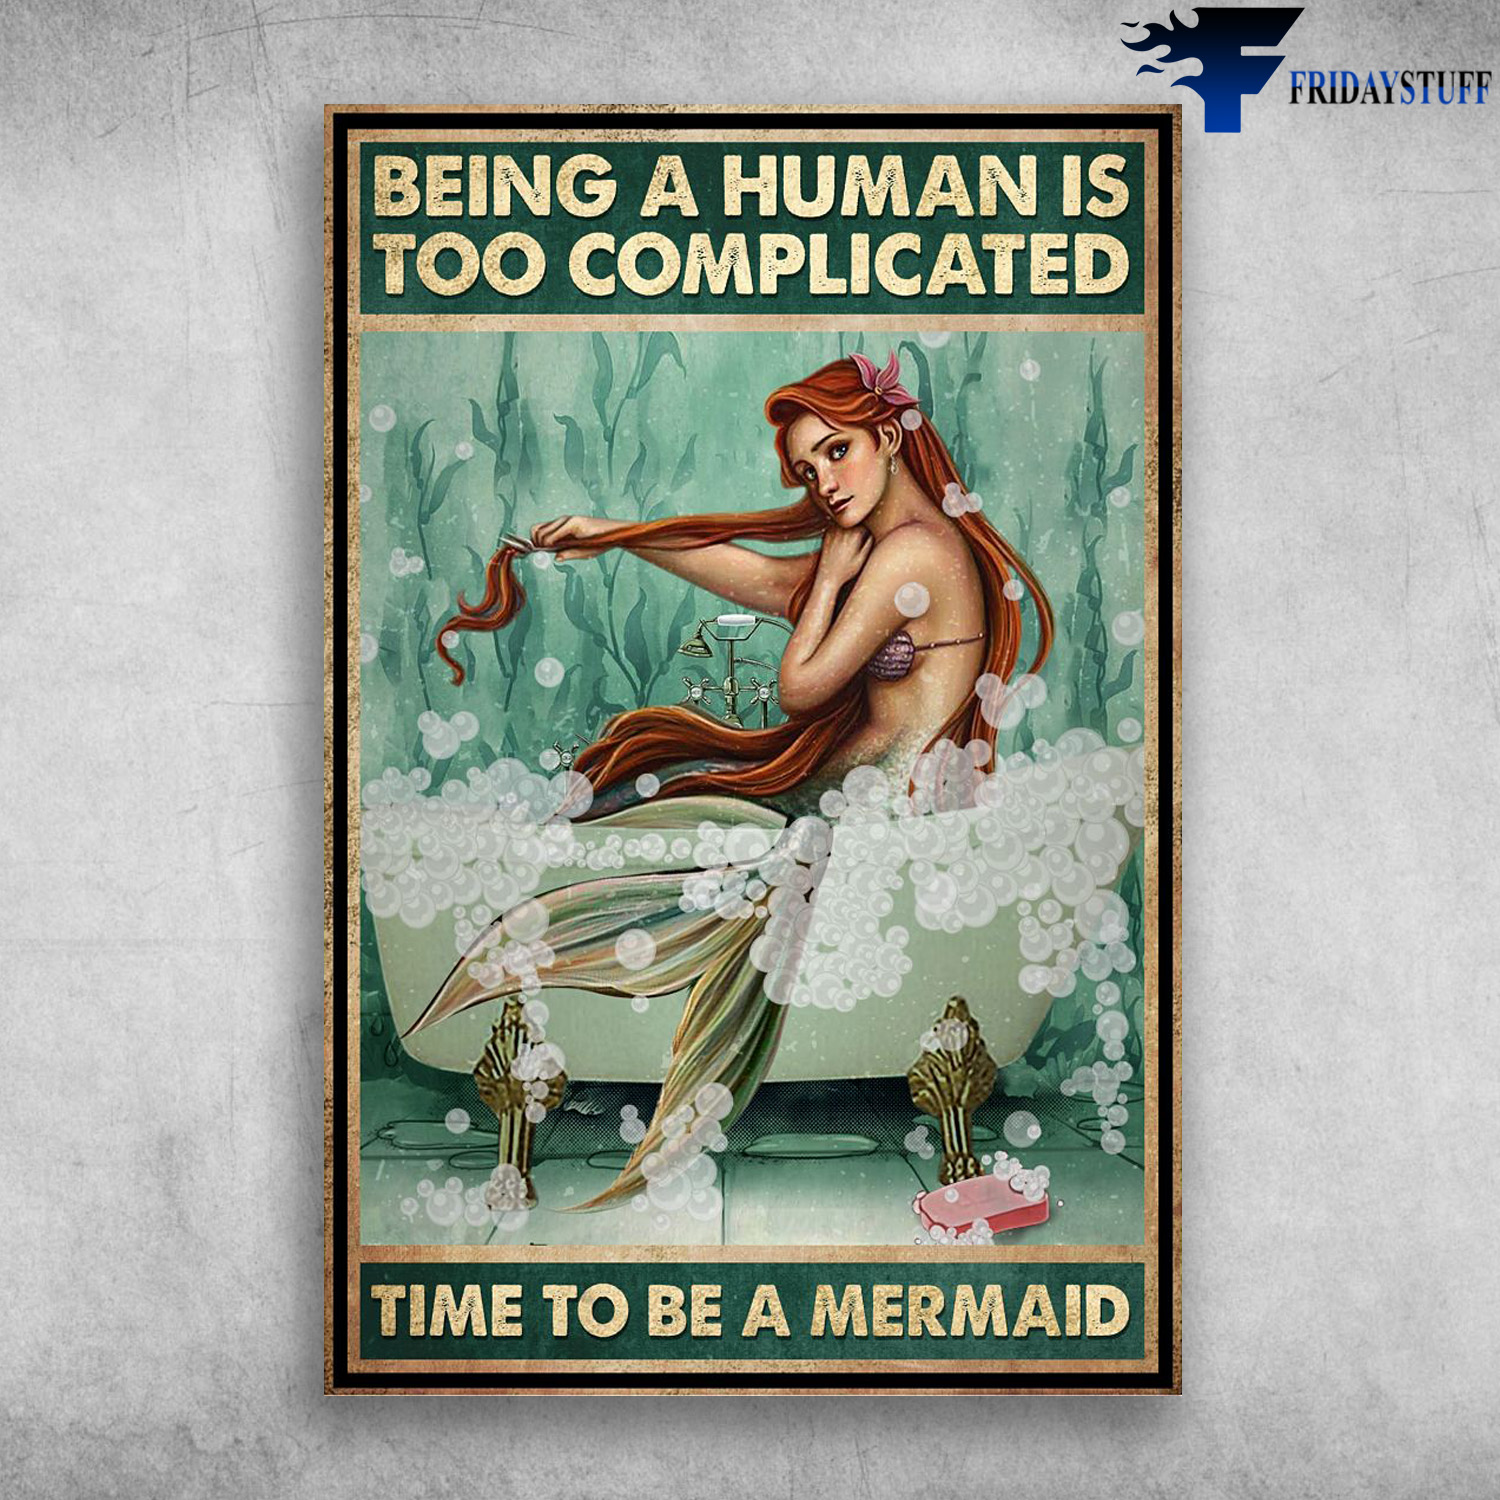 Mermaid In The Bath - Being A Human Is Too Complicated, Time To Be A Mermaid